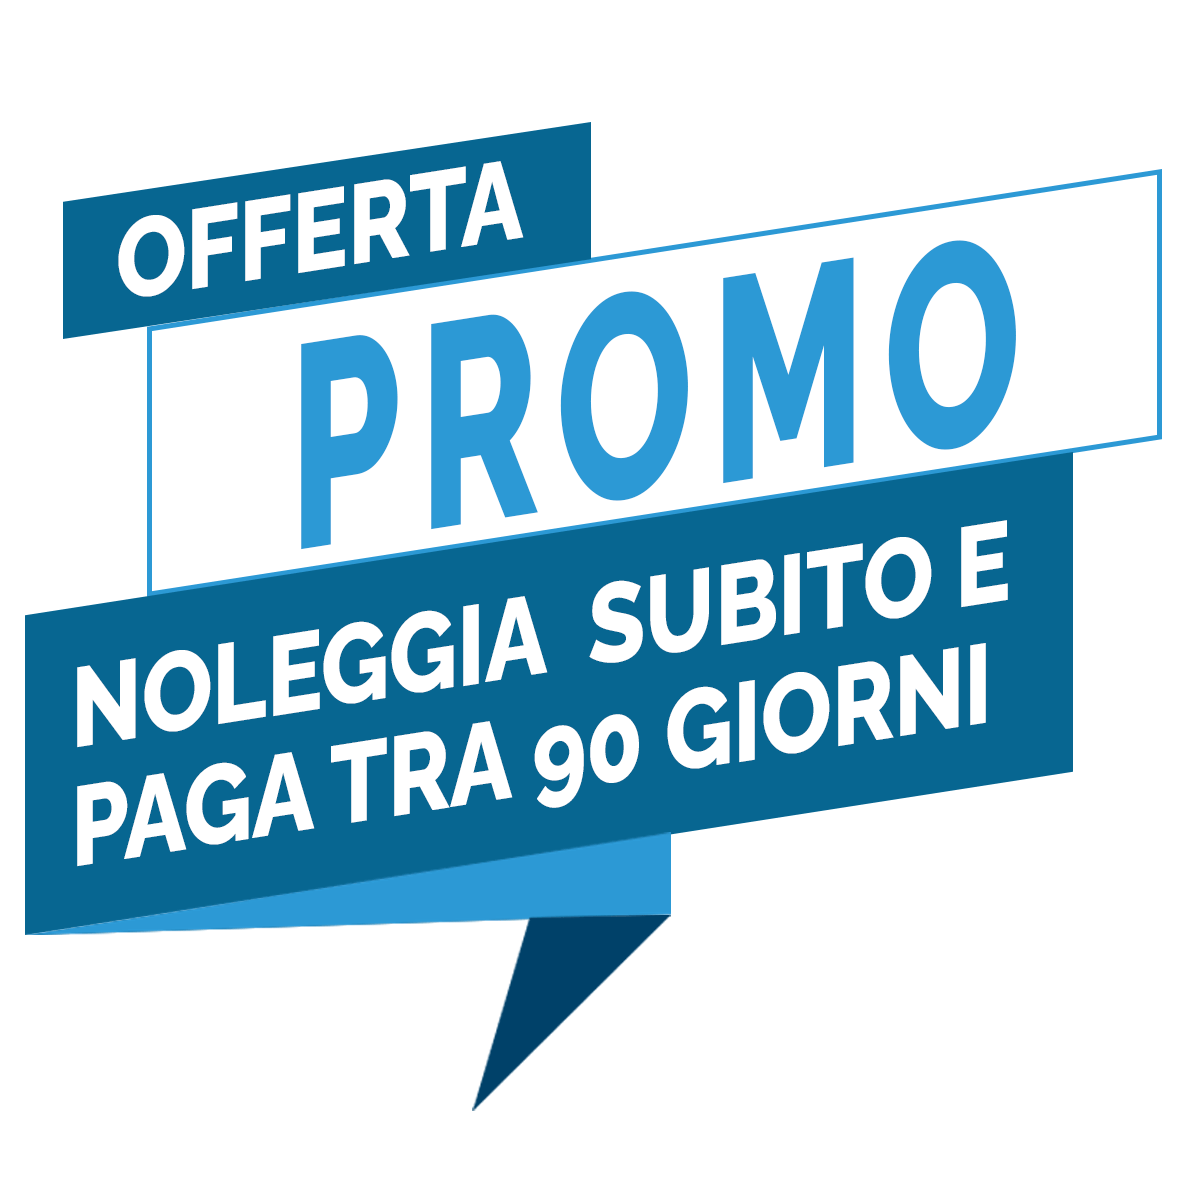 https://exasys.it/wp-content/uploads/2021/05/Promo-90-giorni-2.png